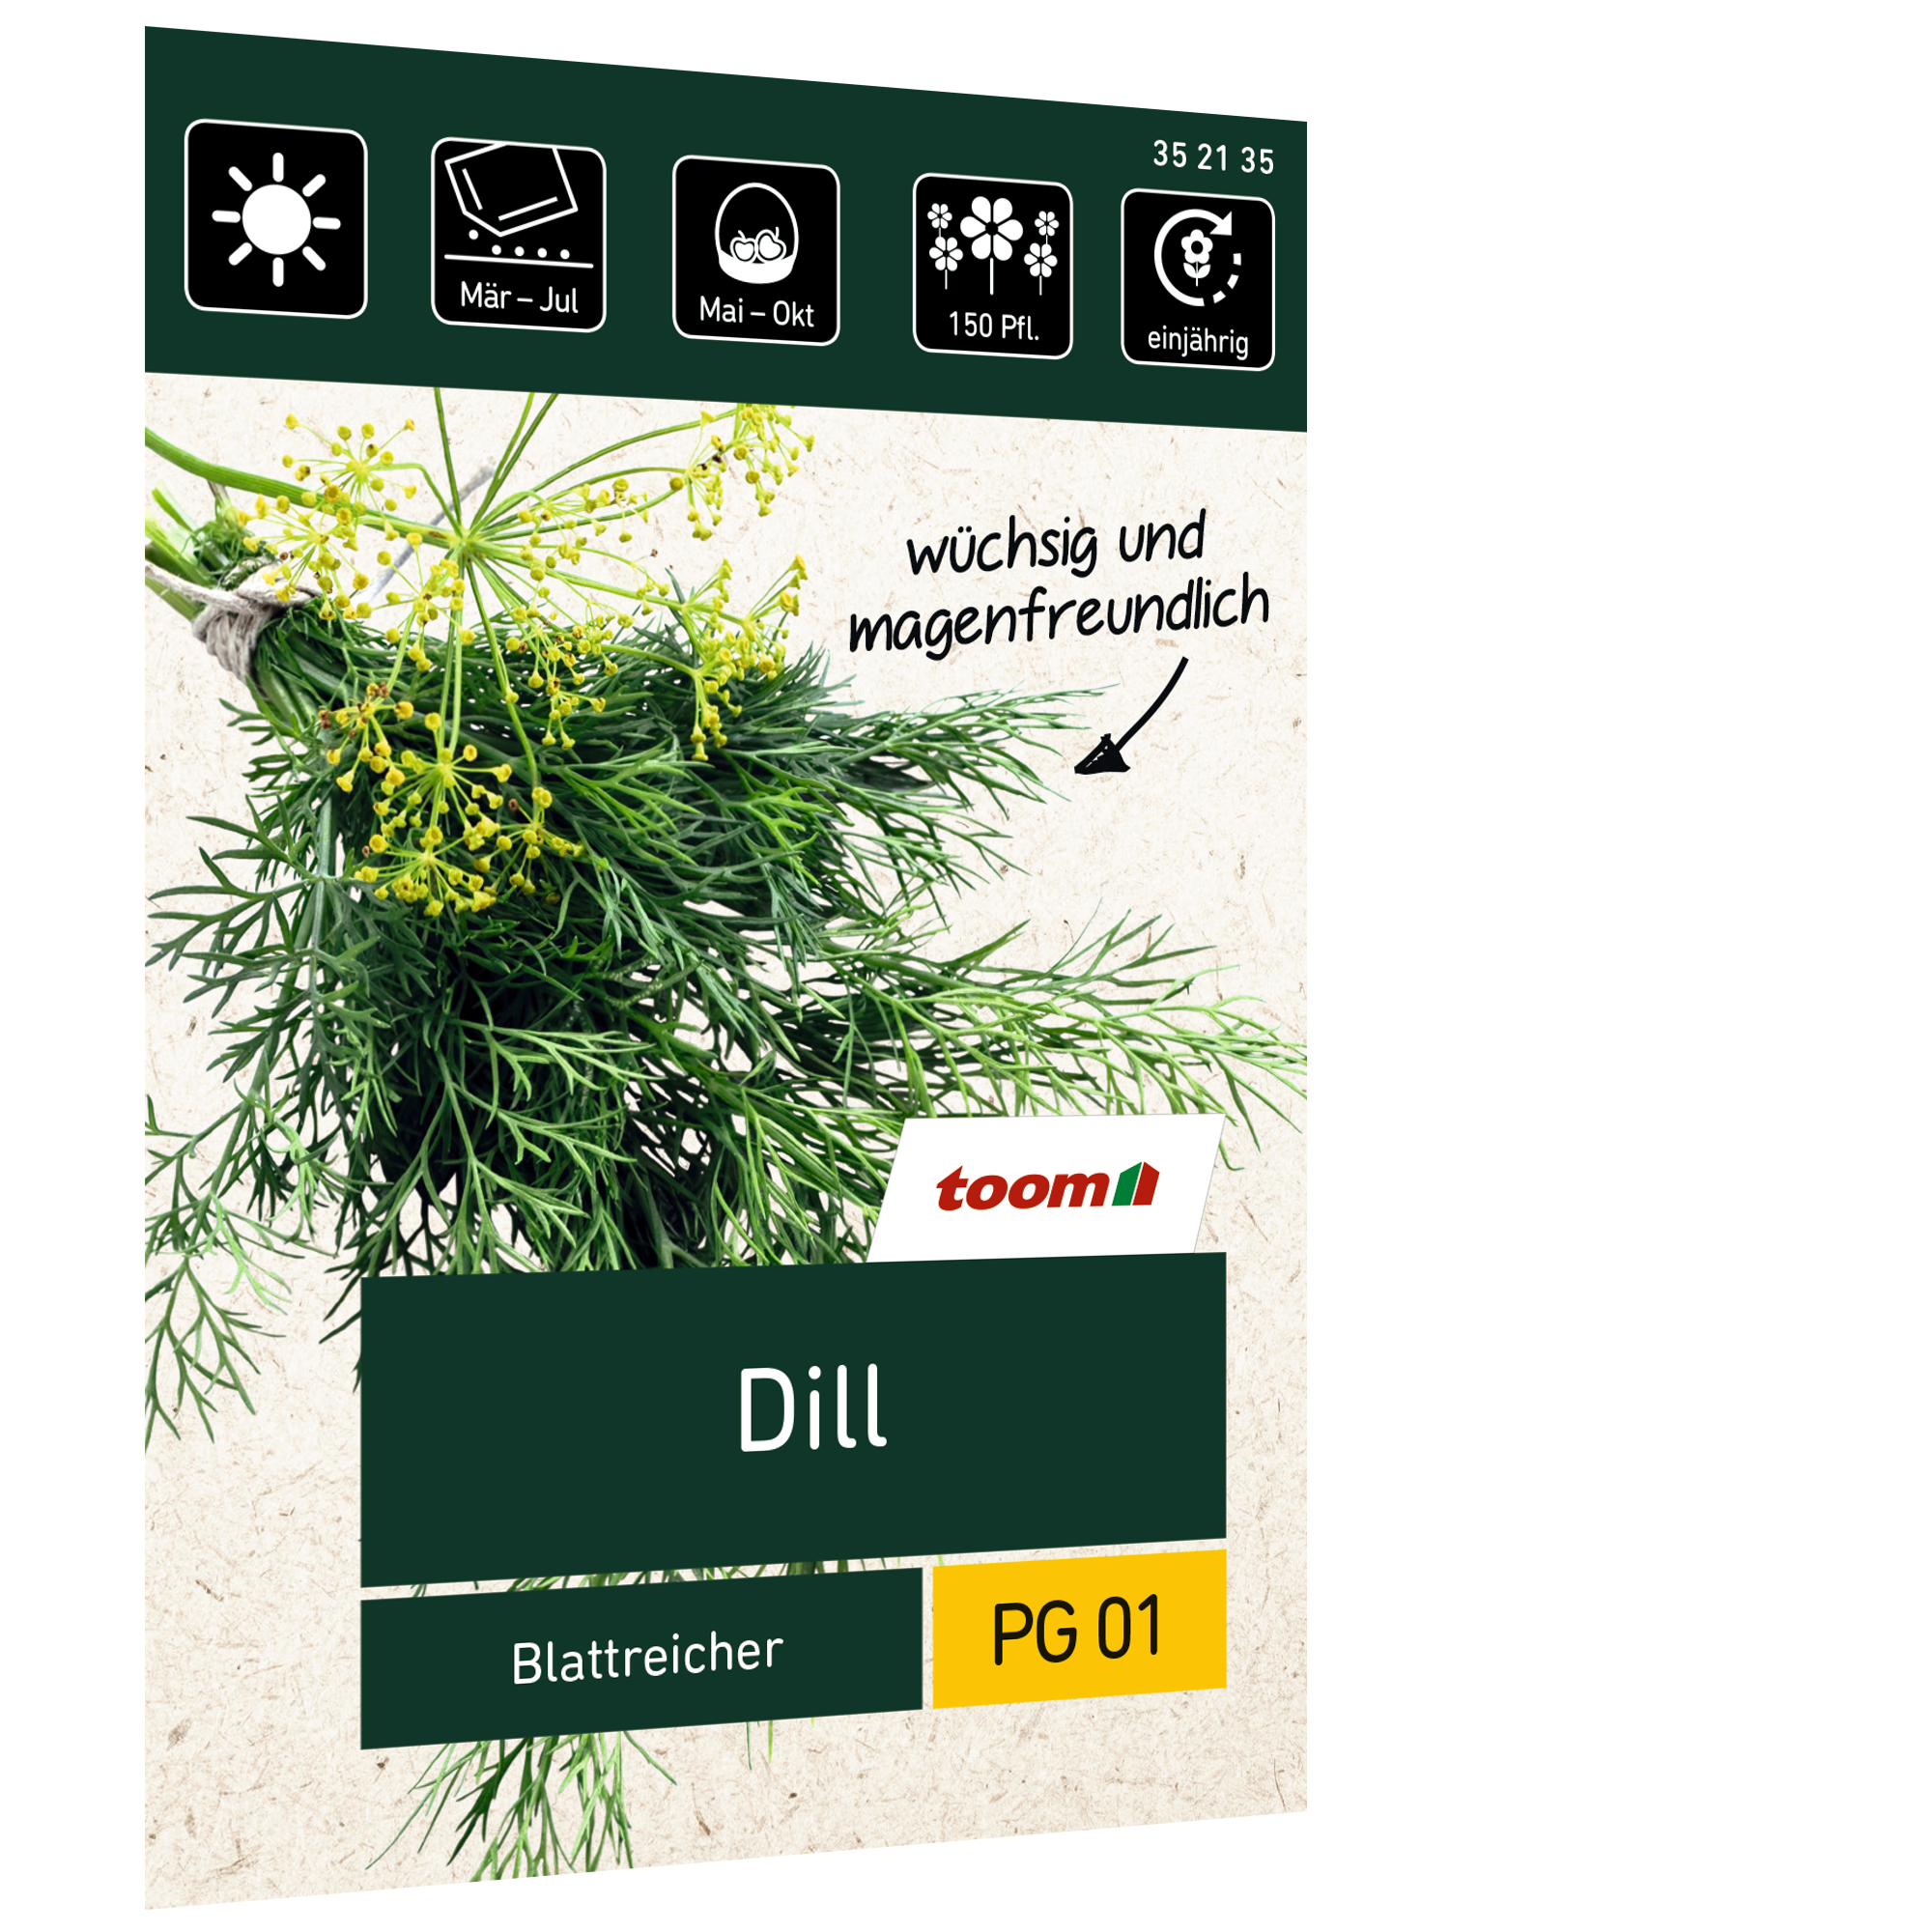 Dill 'Blattreicher' + product picture